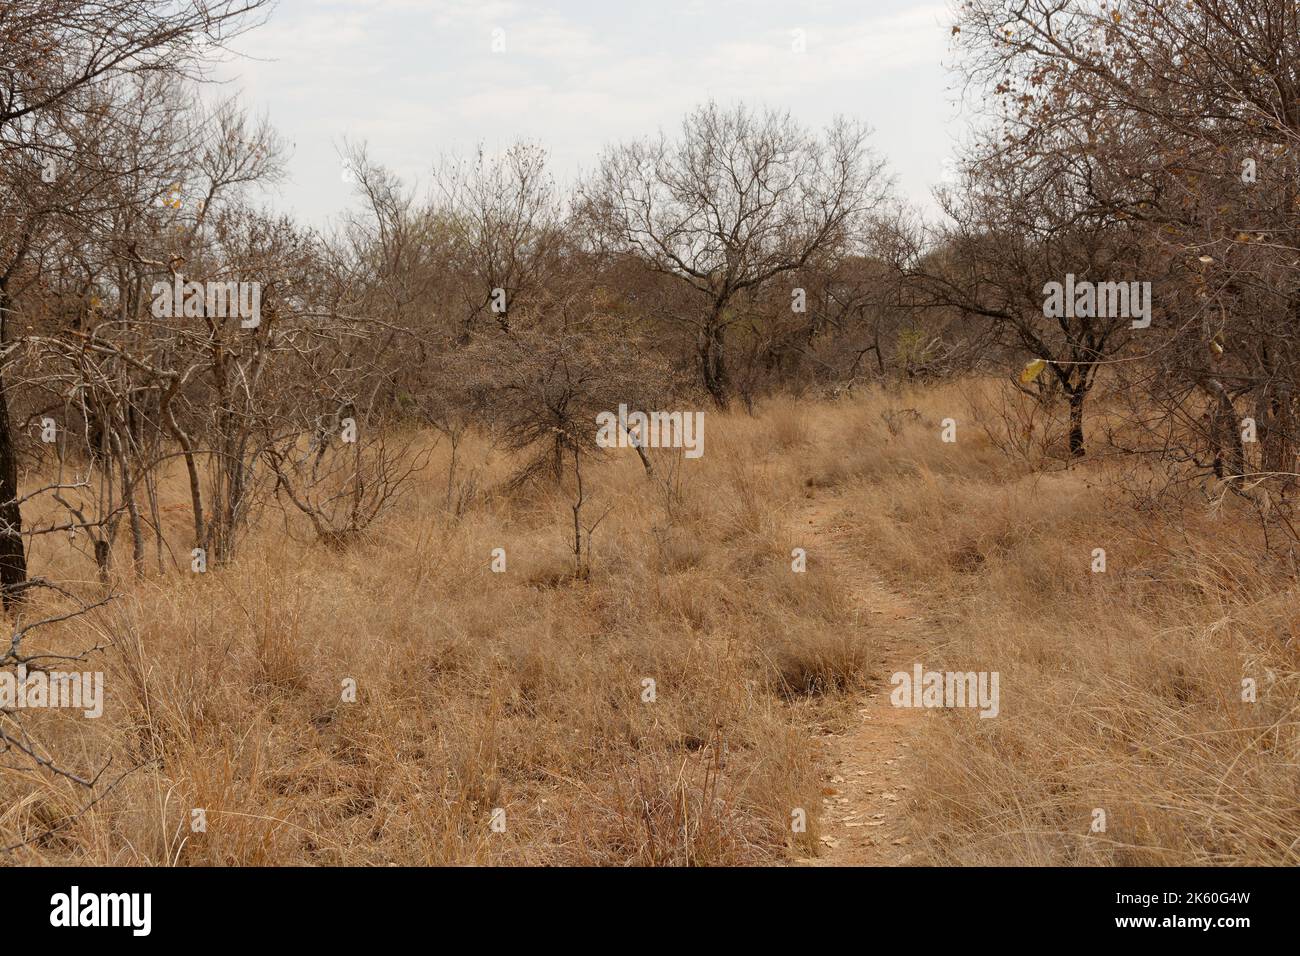 Bush Path leading through the dry Bush Veld in South Africa - a walk in the wild Stock Photo